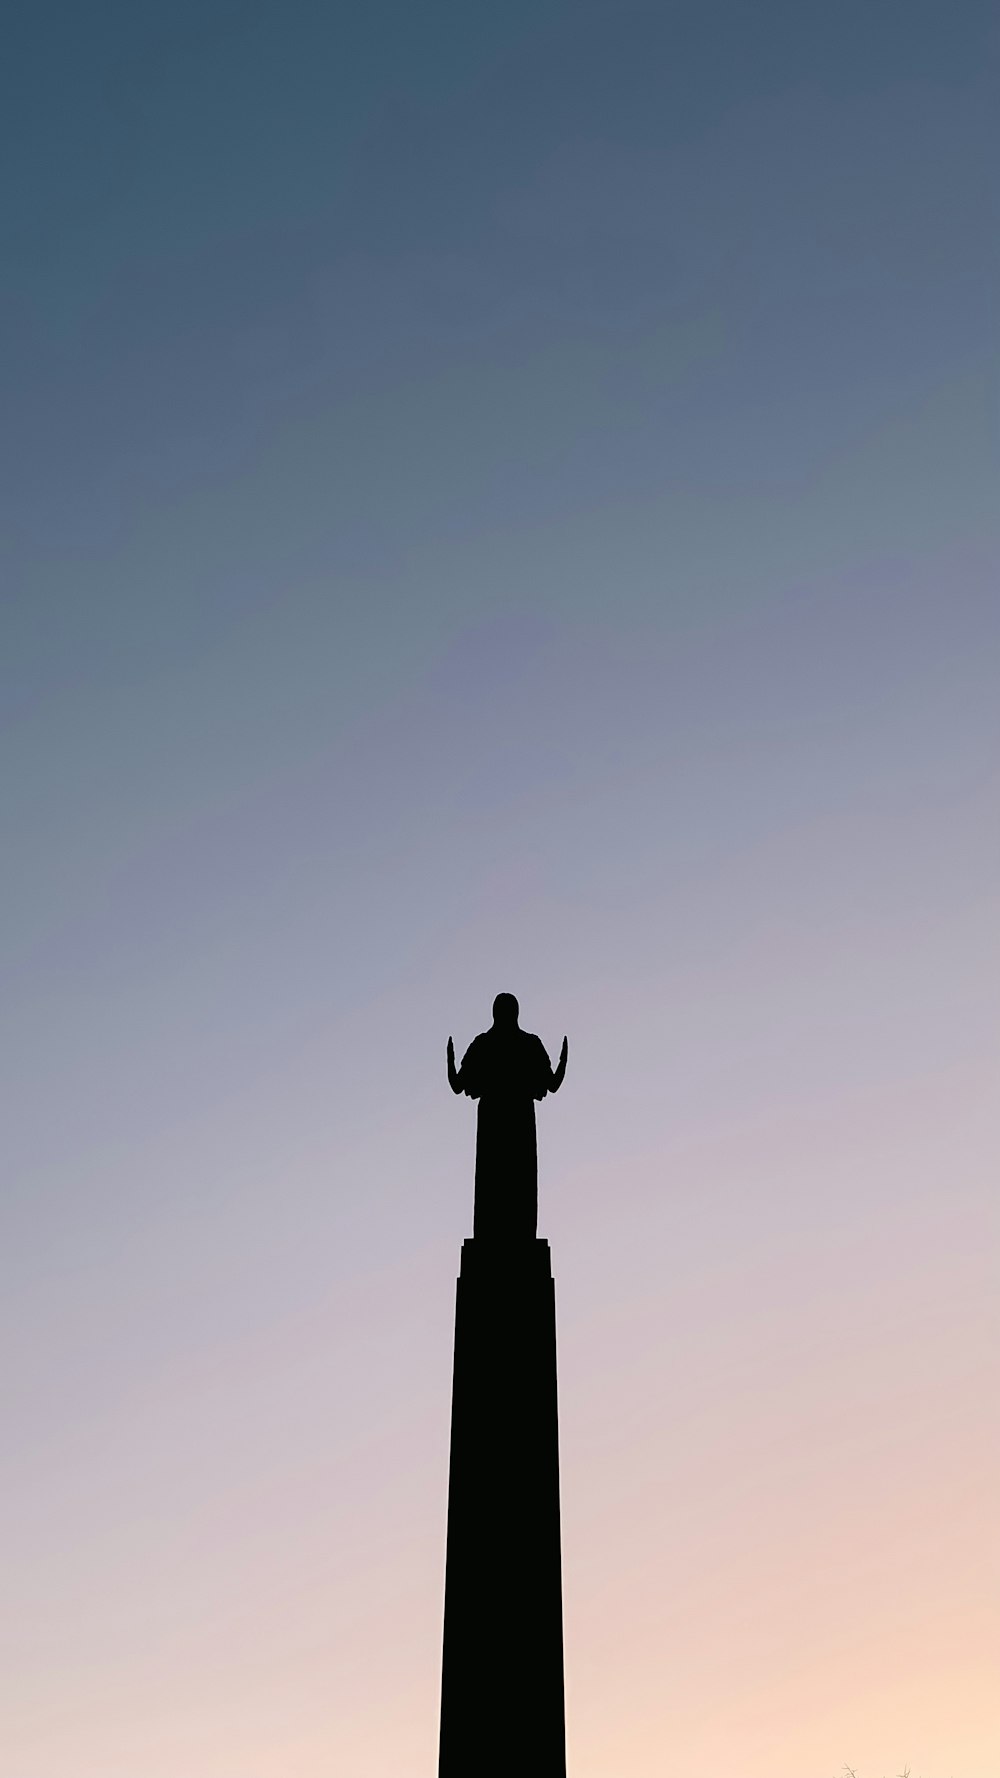 a silhouette of a person standing on top of a tower